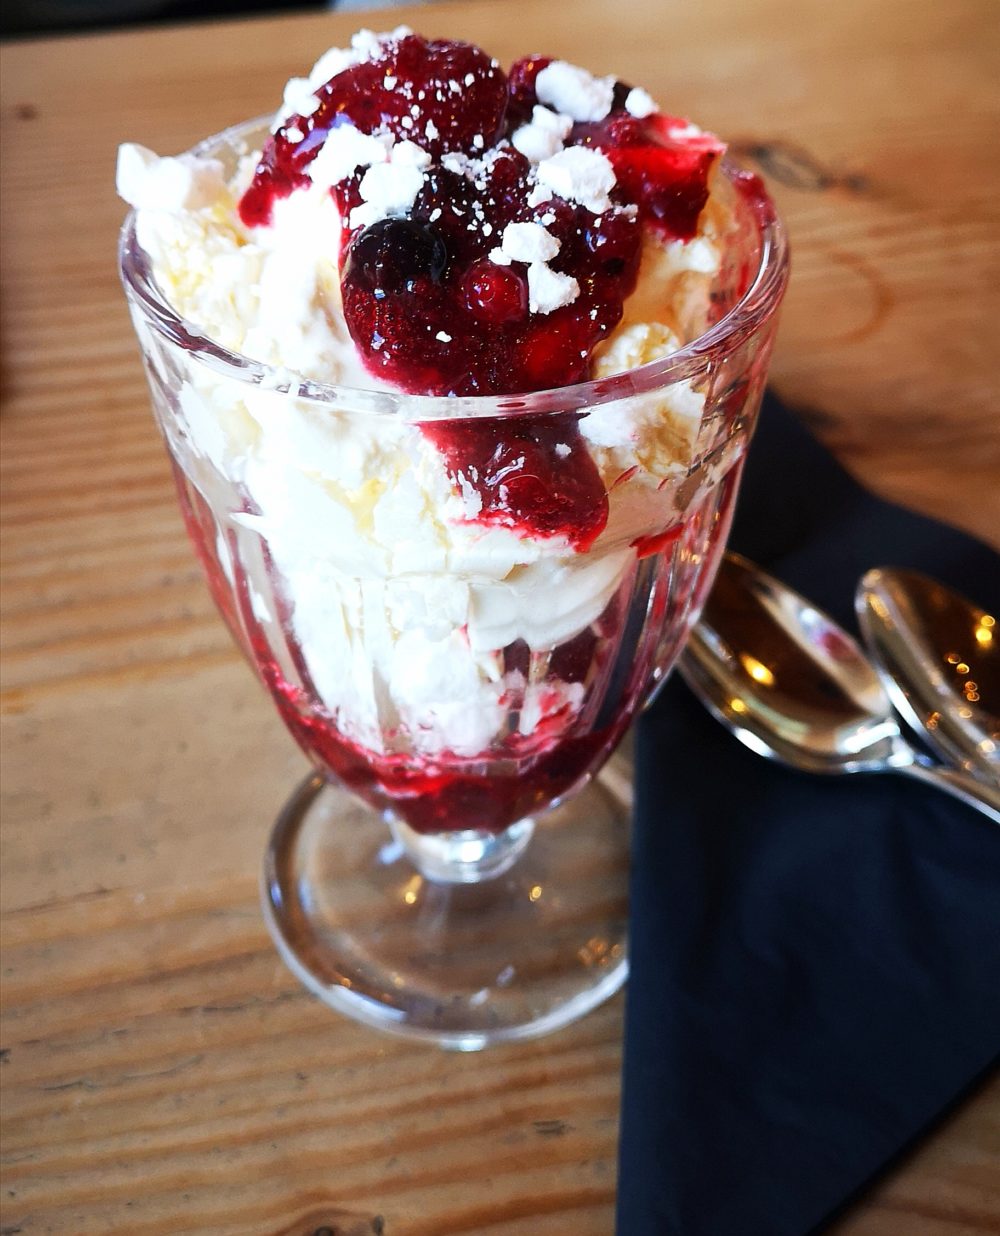 vegan eton mess in a glass dish on a table